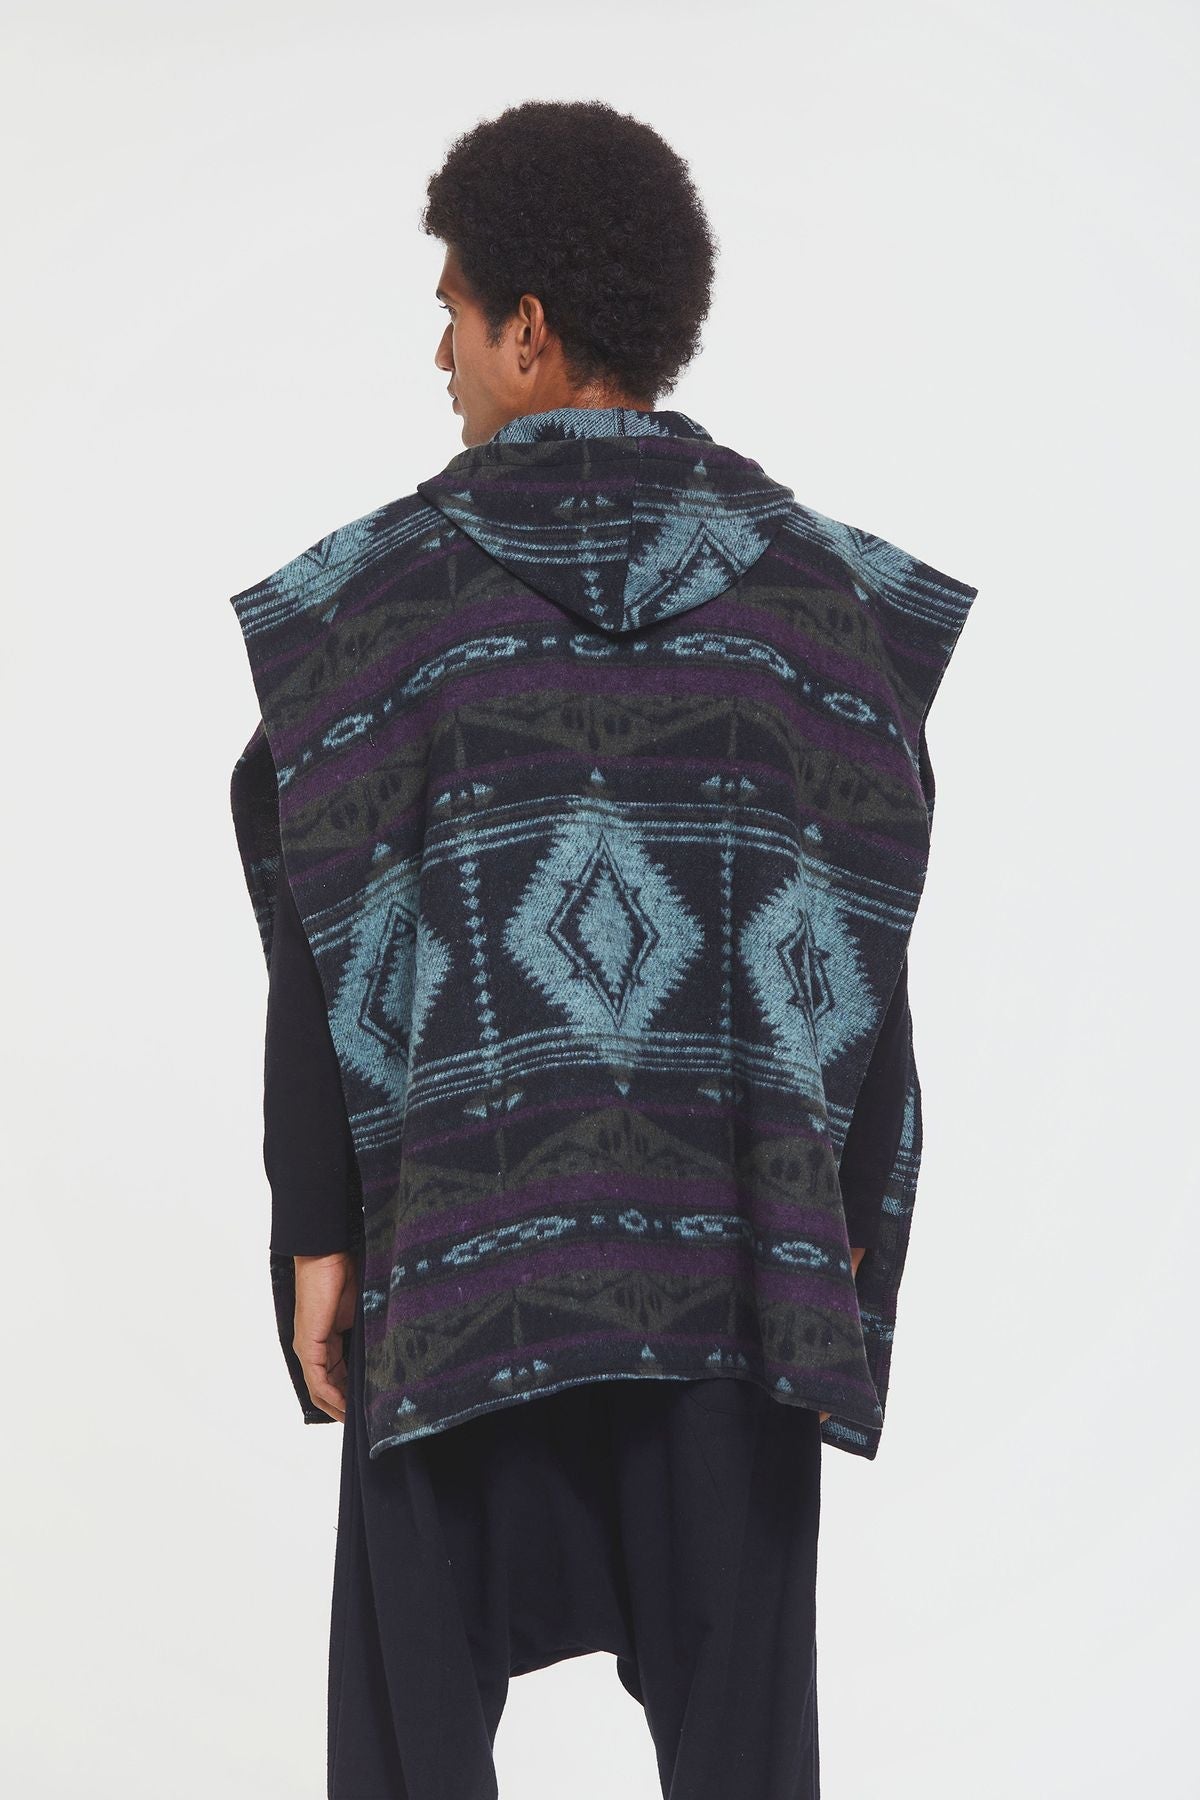 Ethnic Patterned Hooded Poncho Purple